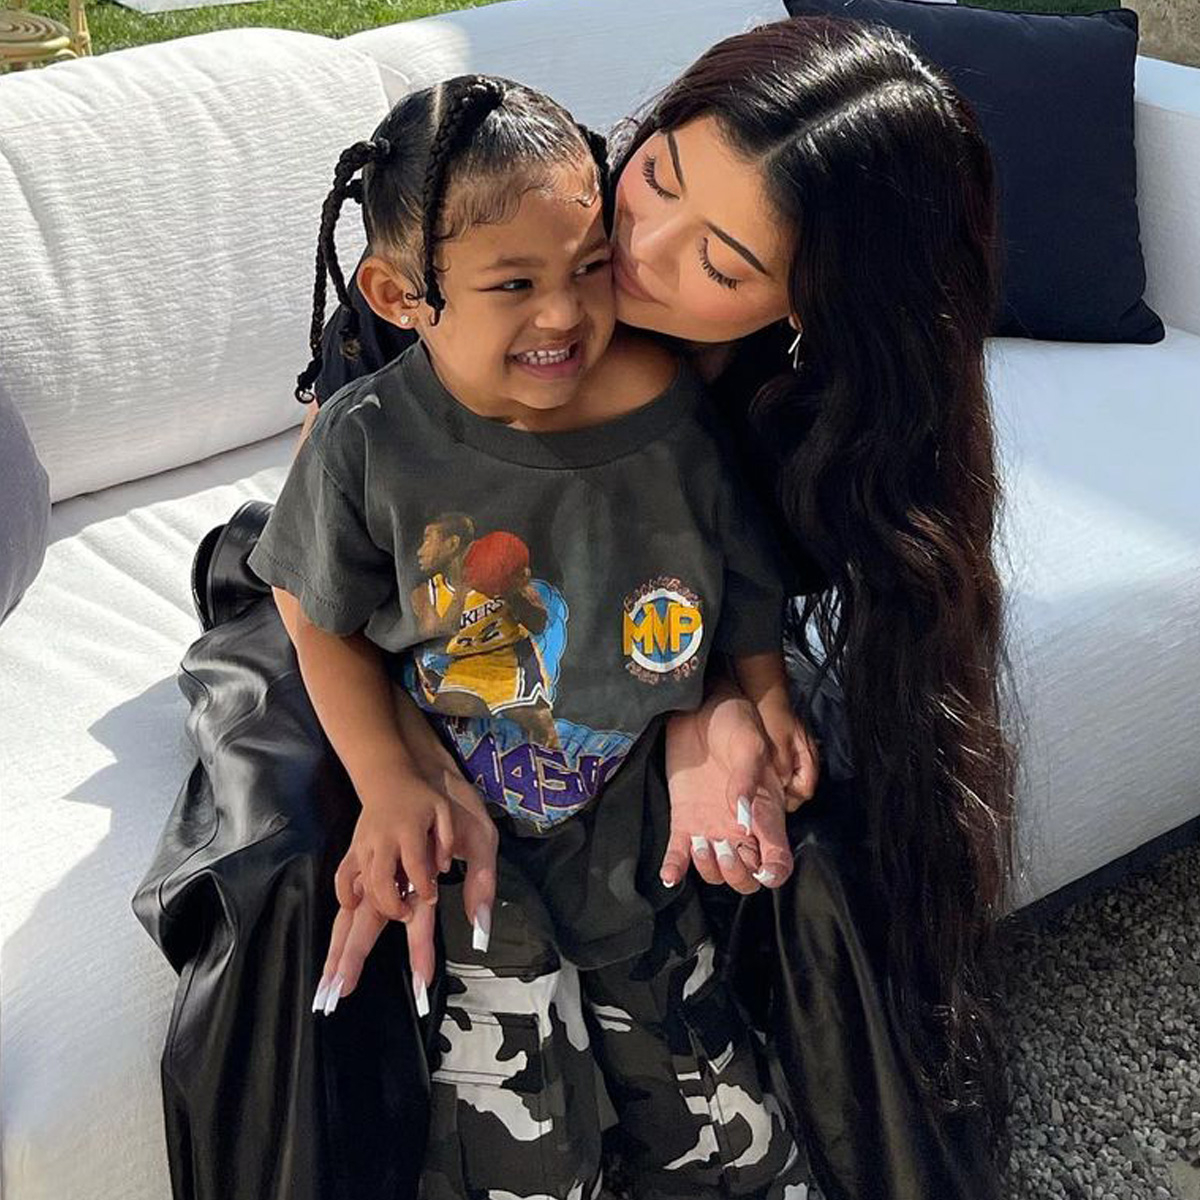 Kylie Jenner and Stormi Webster Play Dress-Up After Instacart Drama